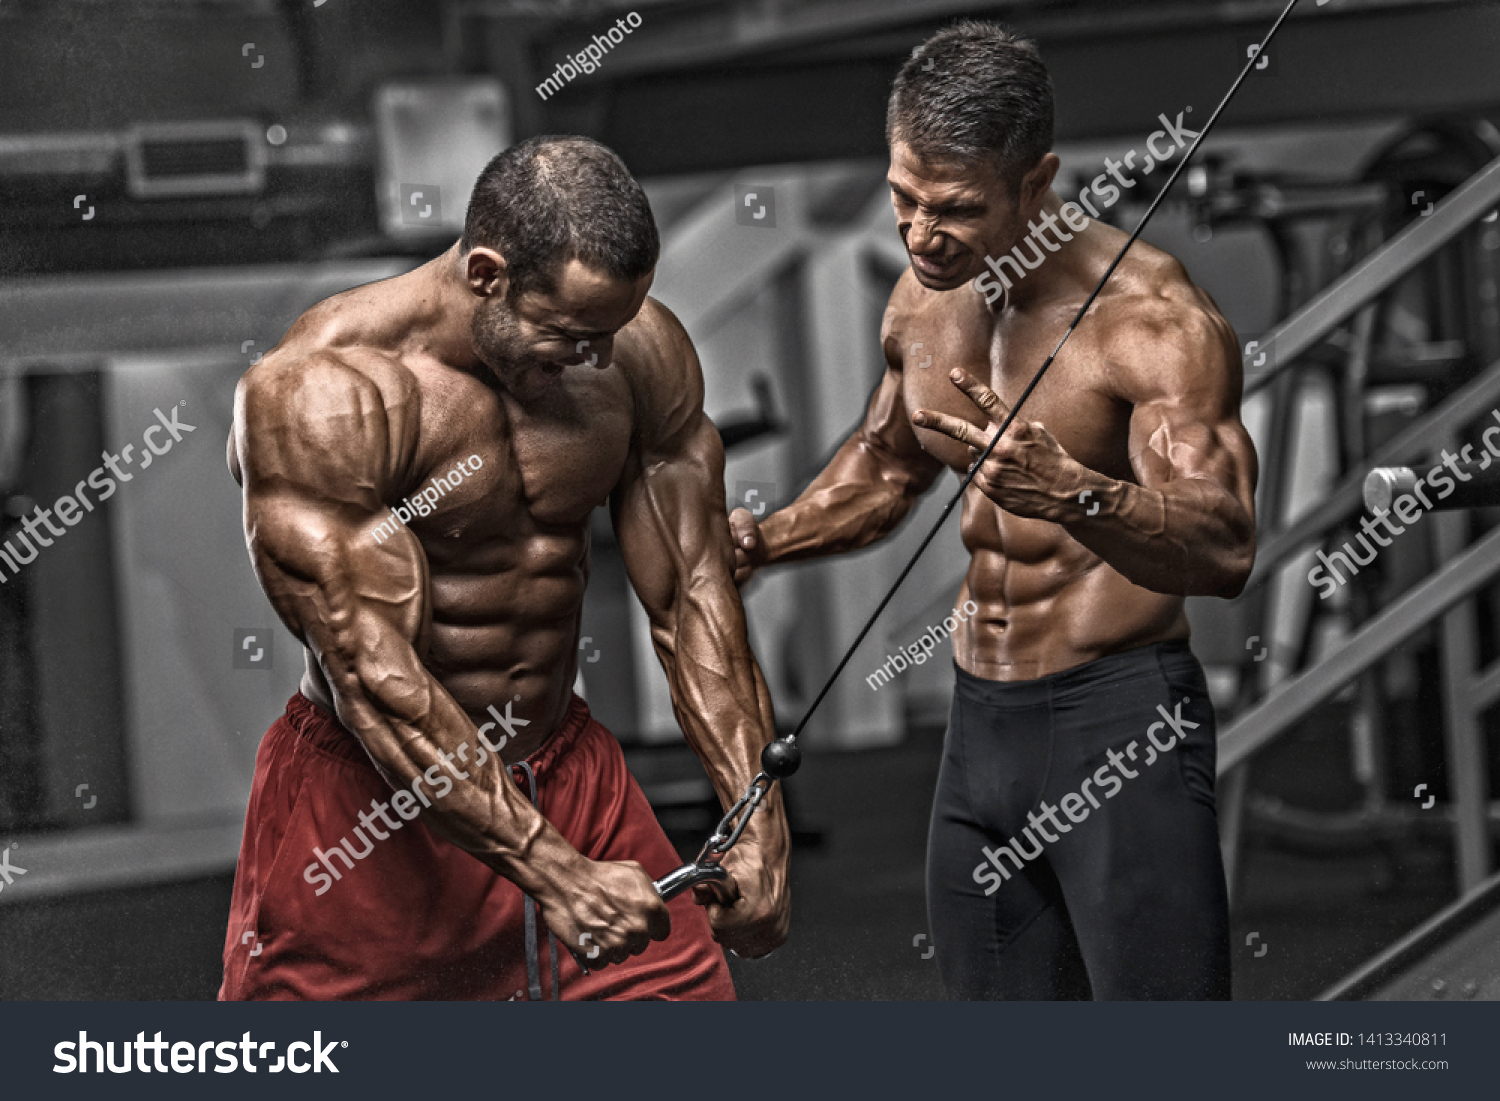 Bodybuilding Motivation. Two Bodybuilders Train Together at the Gym #1413340811